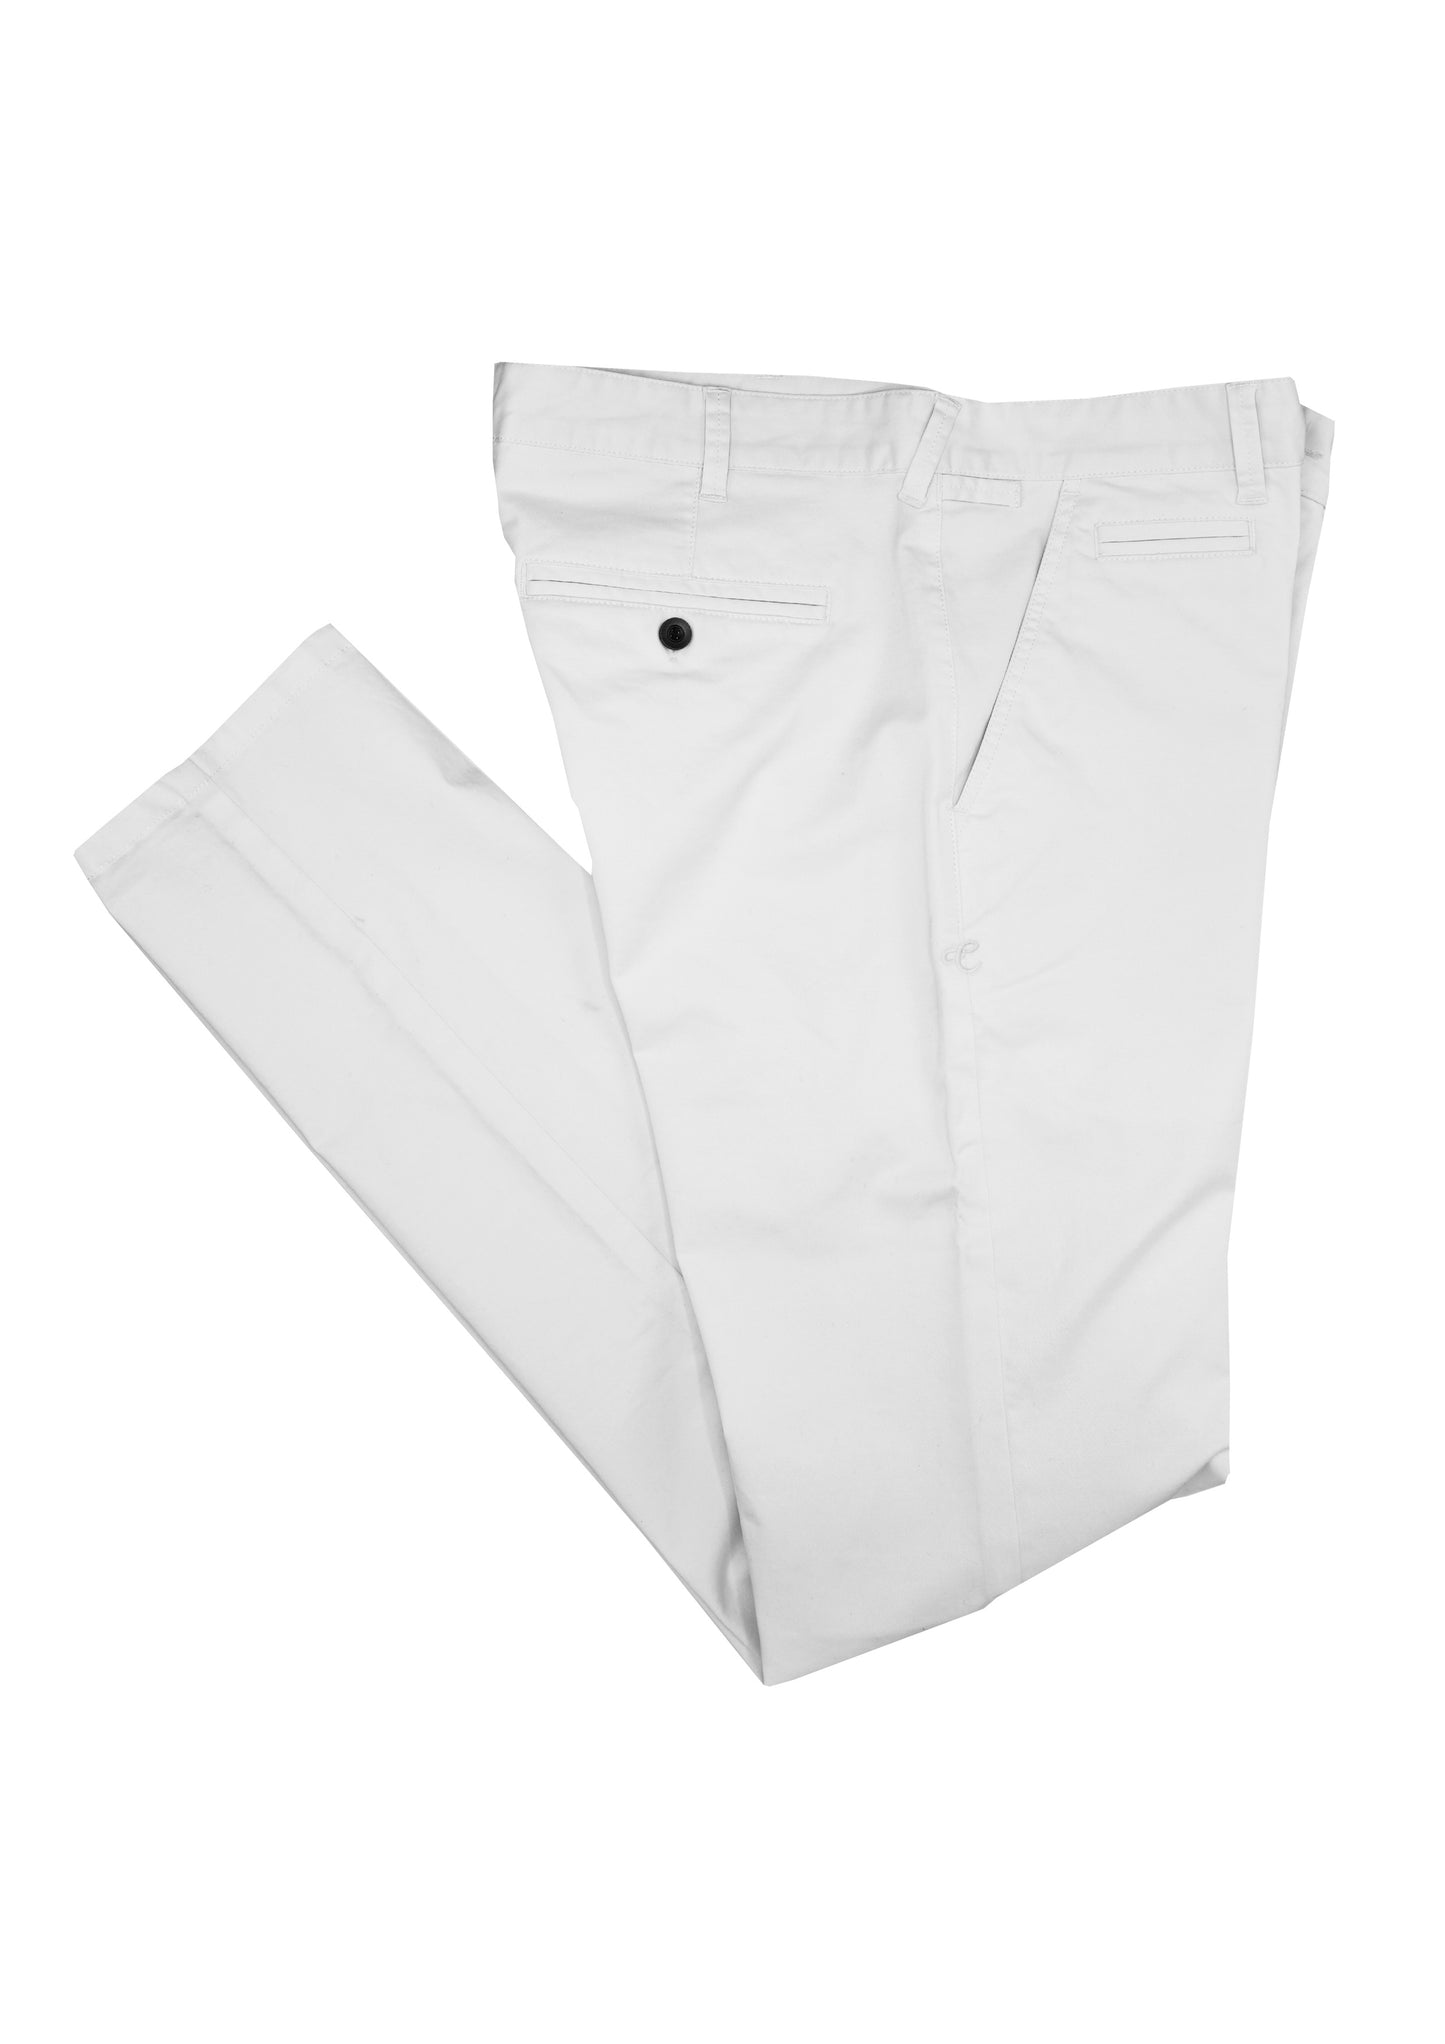 Cutler & Co - Hastin Trousers - White